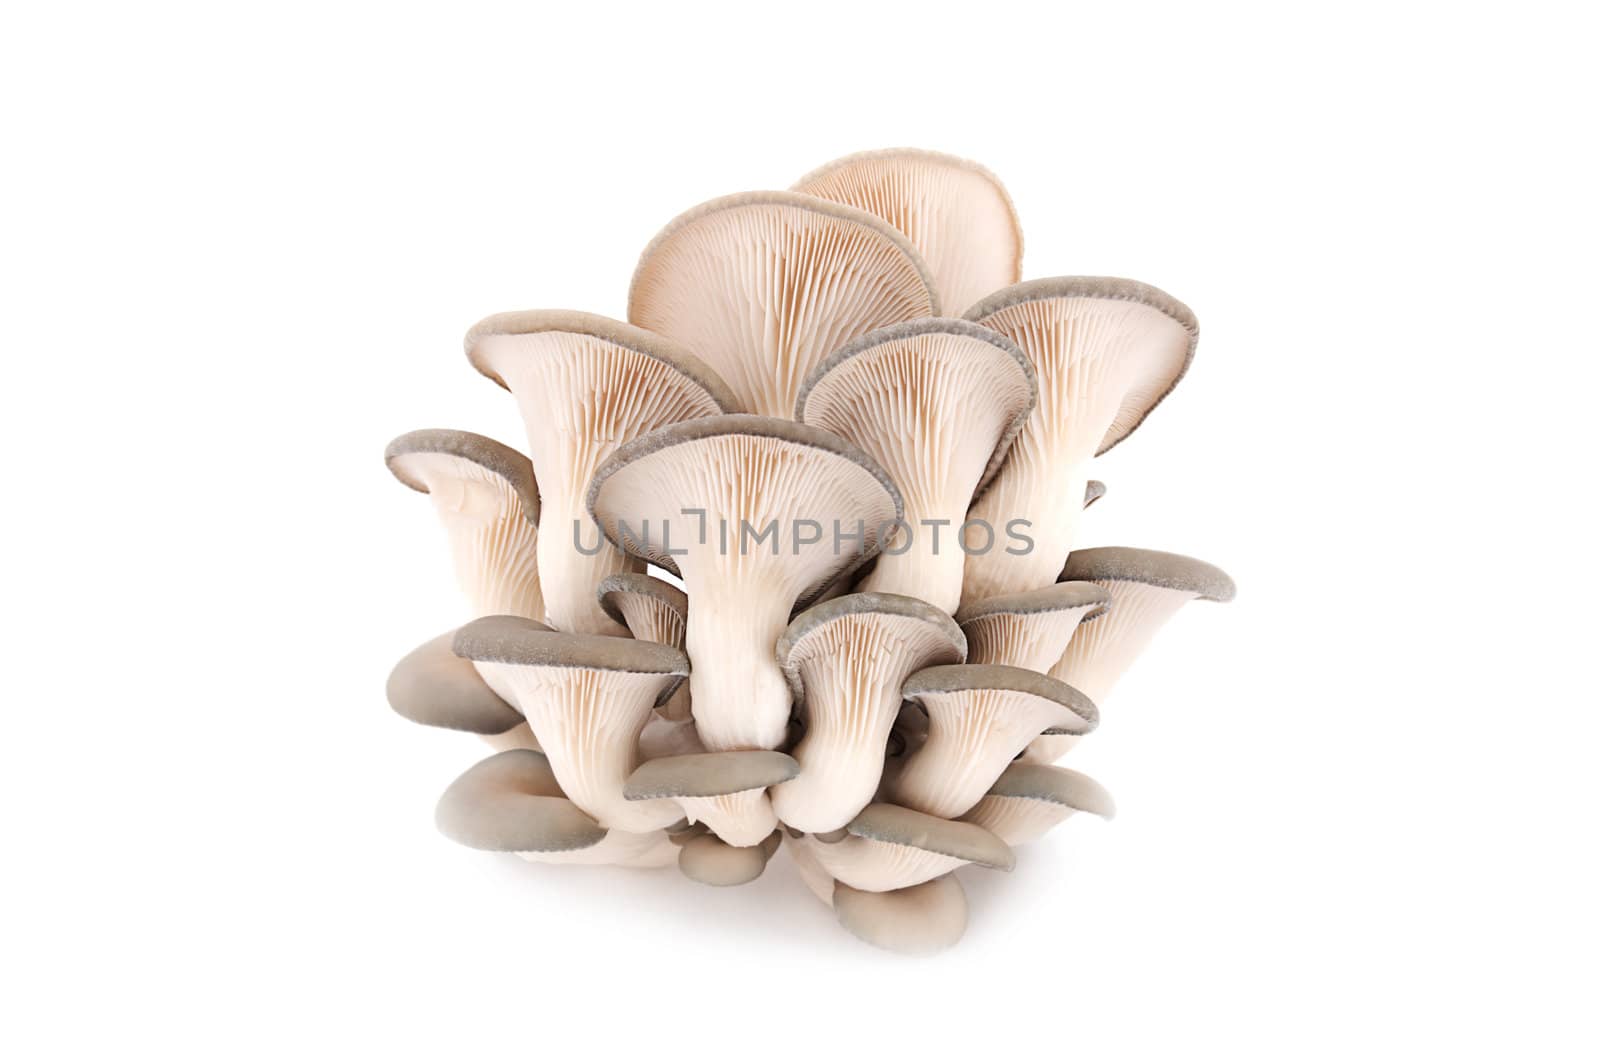 Bunch of oyster mushrooms on a white background